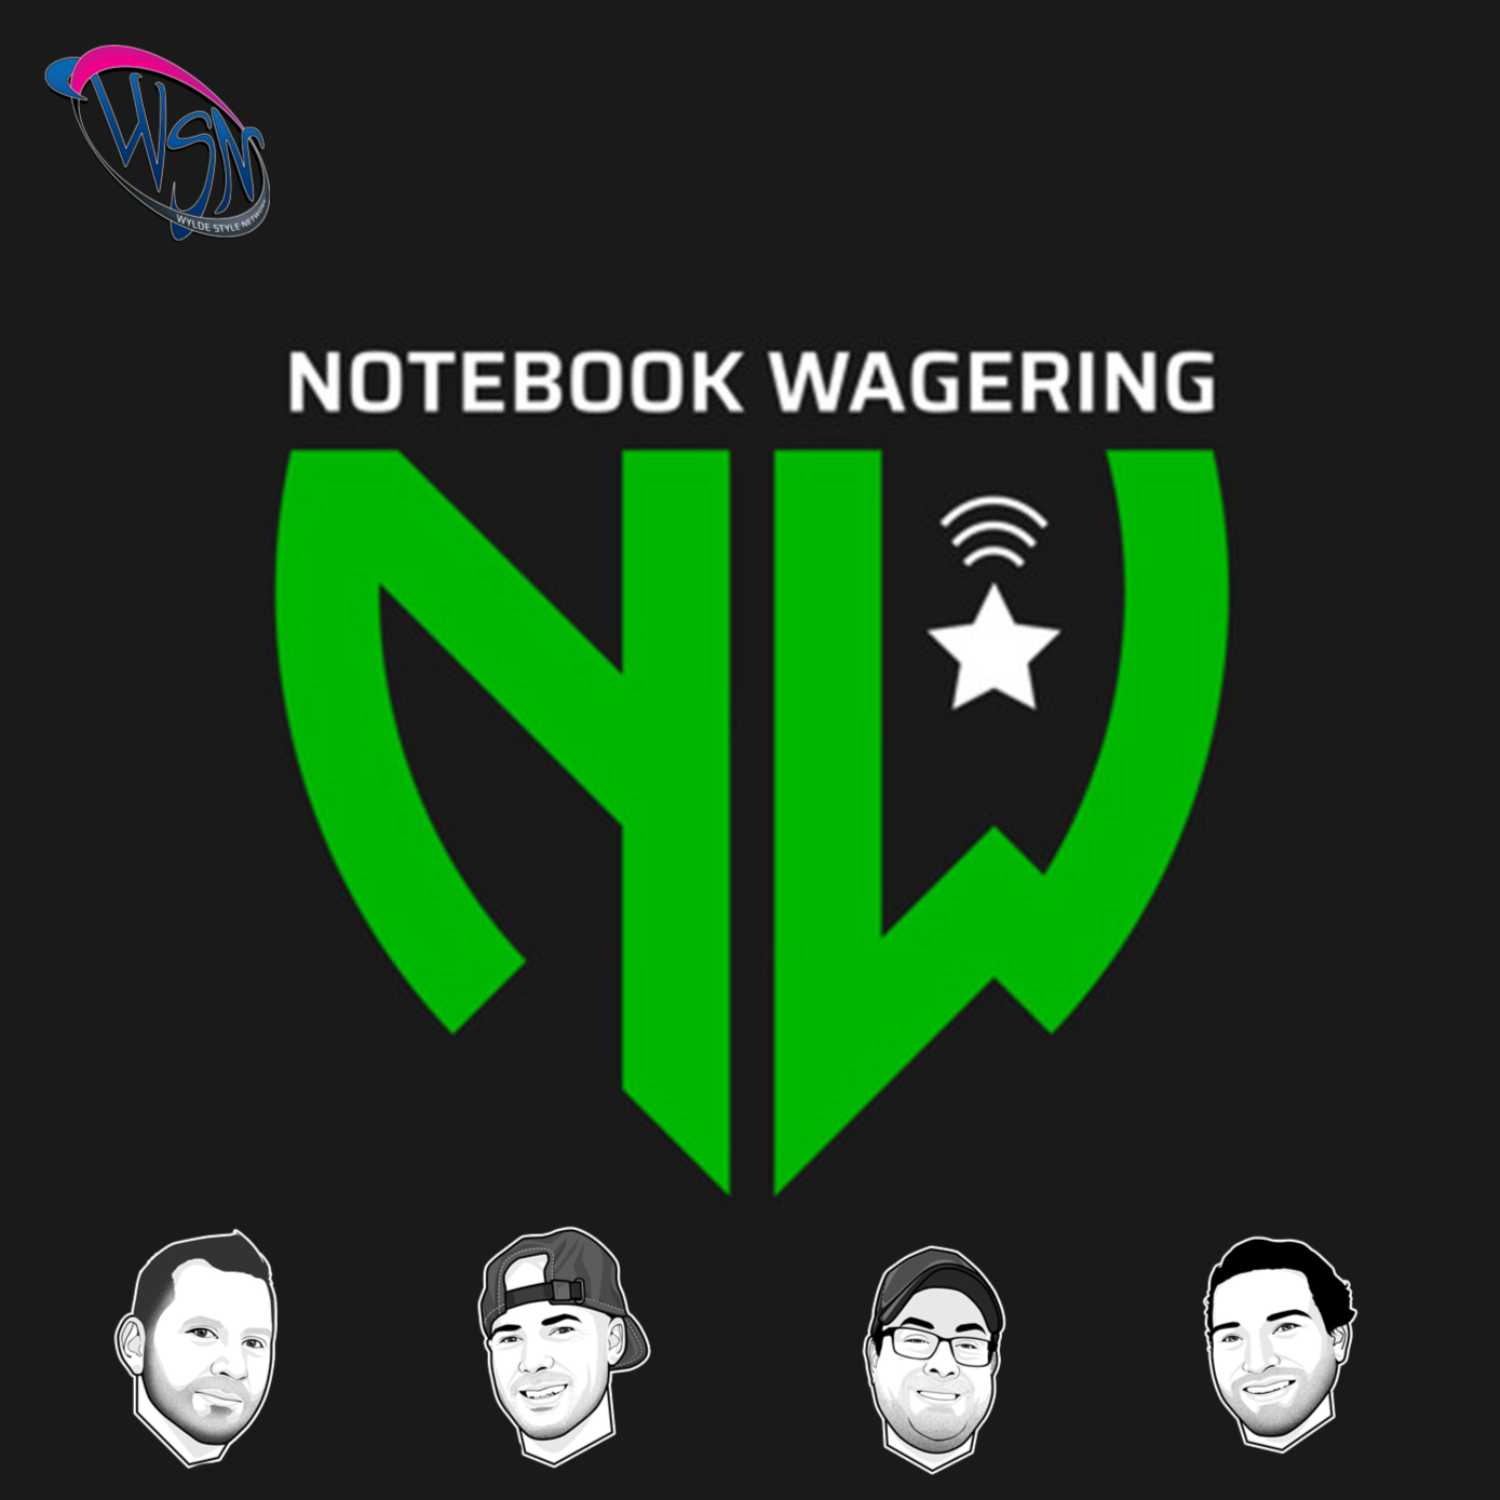 NCAA Baseball World Series Special Edition | Notebook Wagering | Wylde Style Network...Fueled by Monster Energy